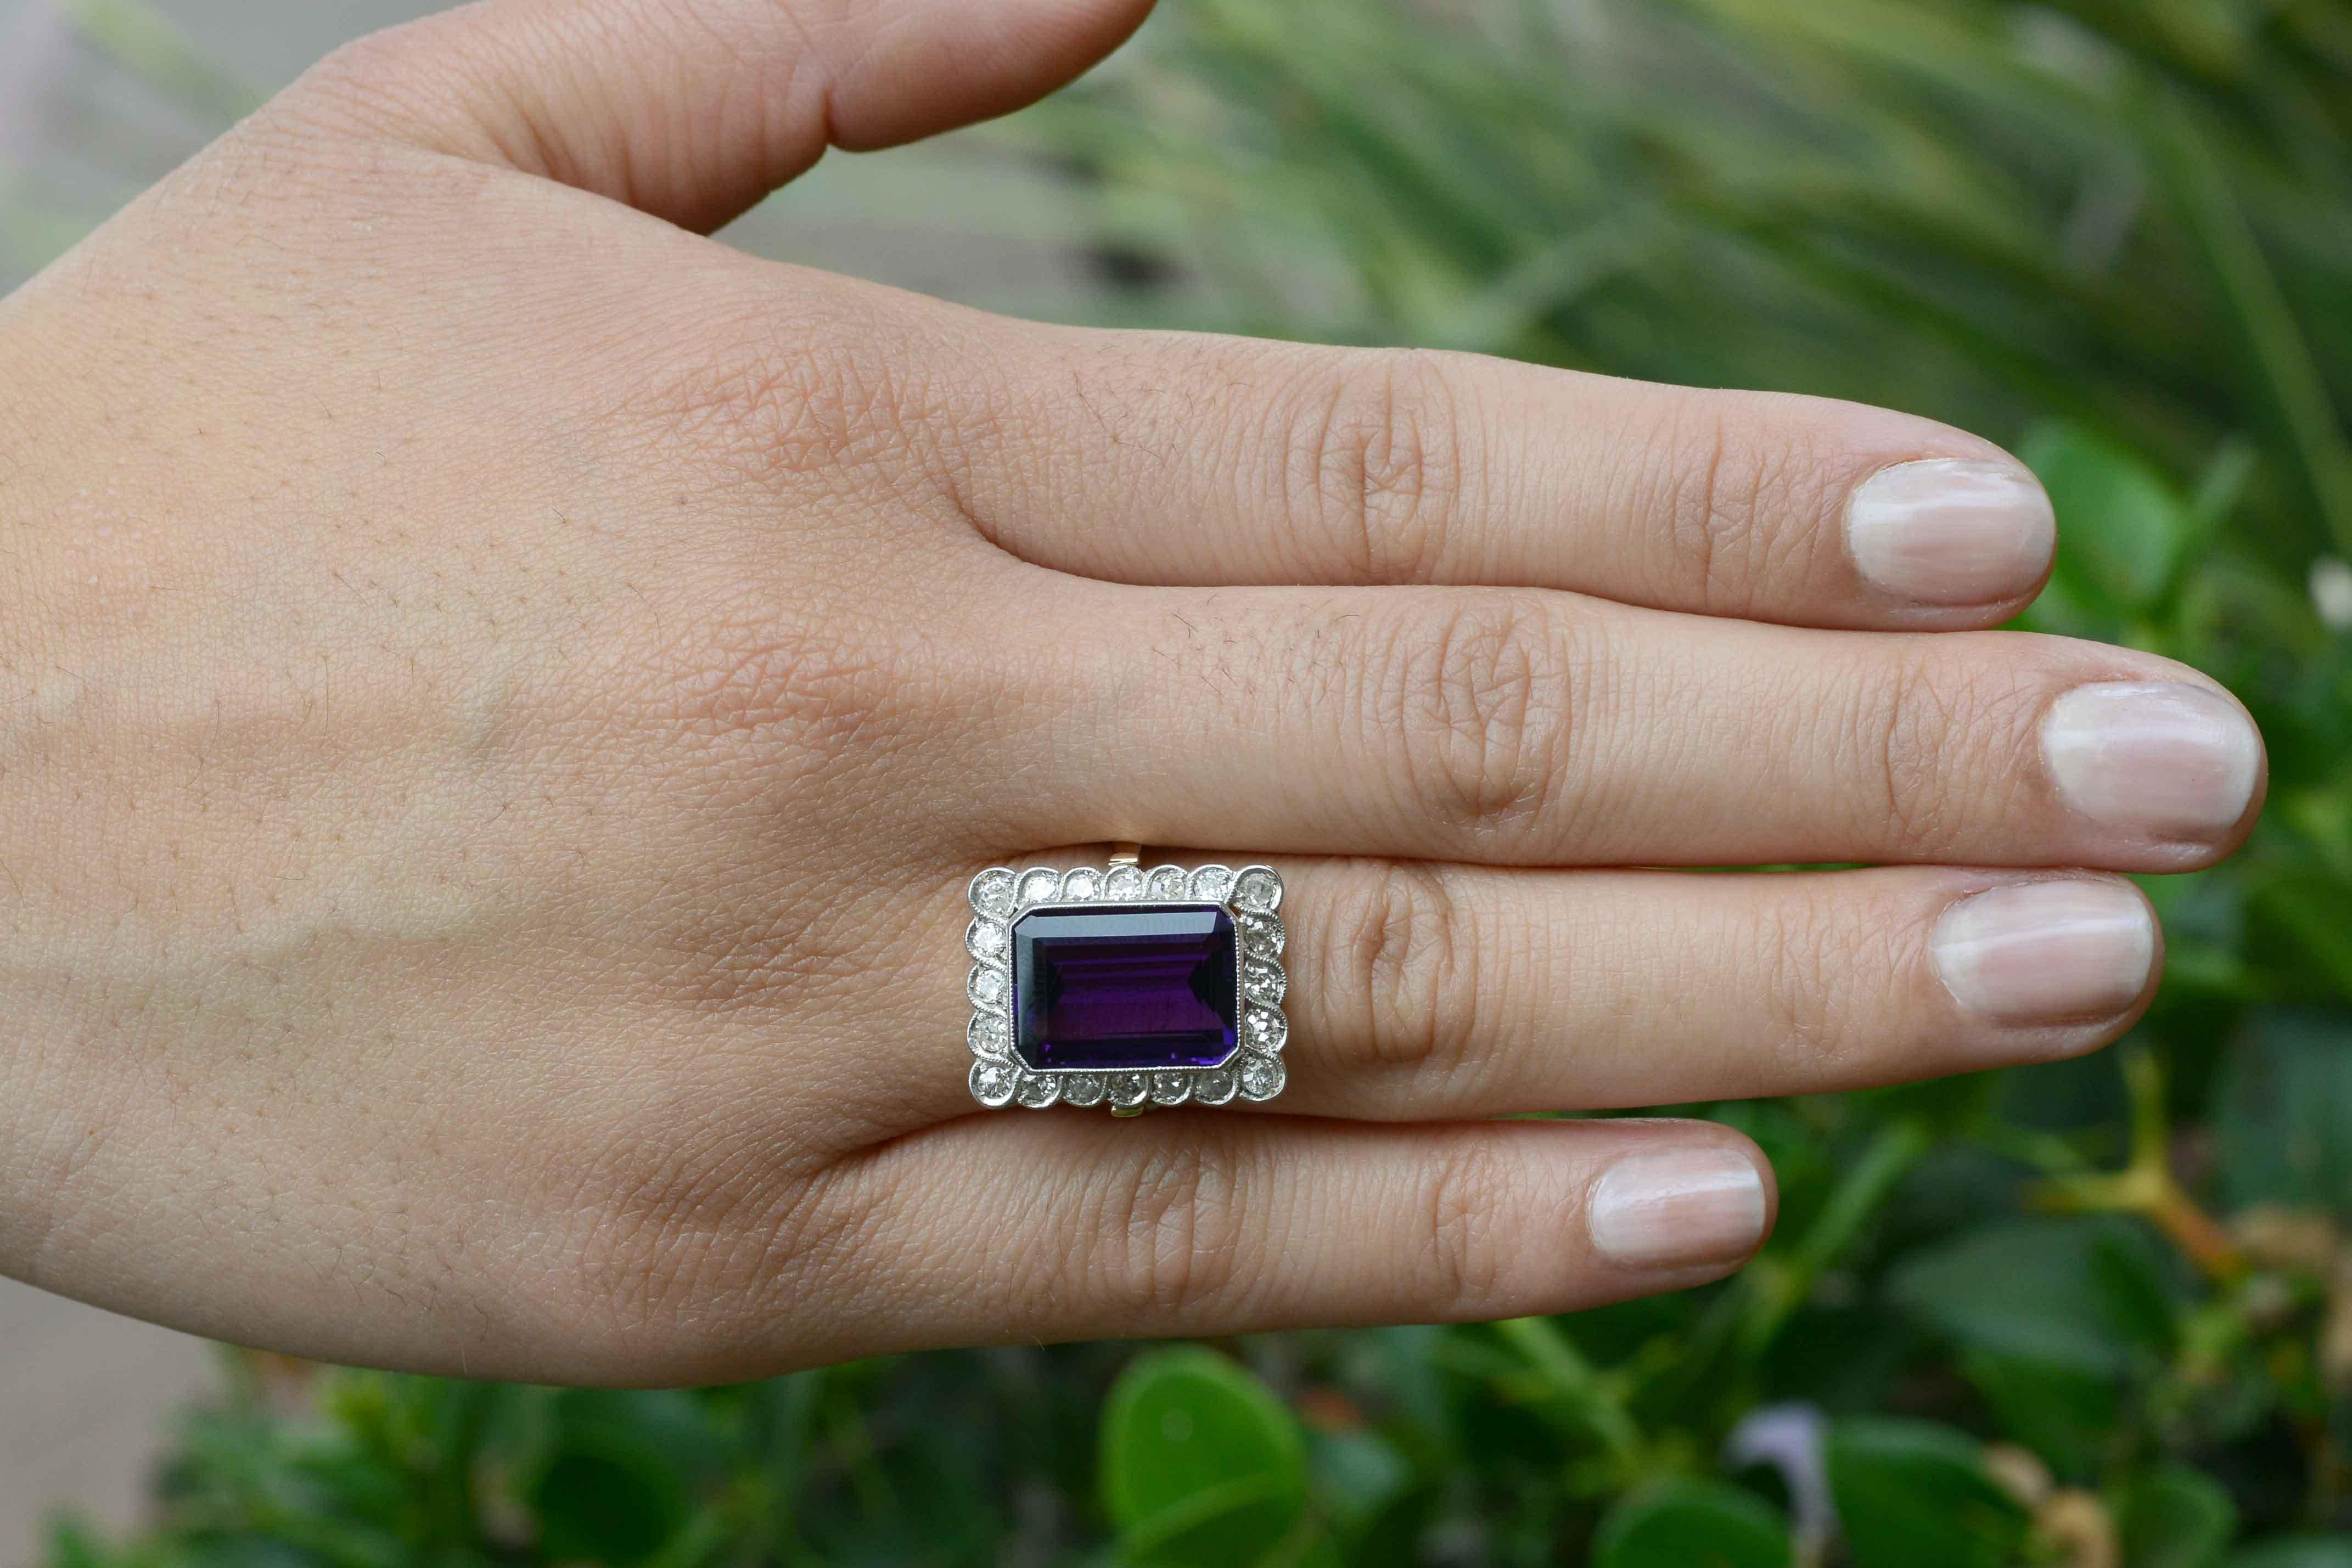 A wonderful example of antique Edwardian jewelry, this circa 1913 stunner is centered by a deeply saturated, velvety and rich royal purple gemstone. At a sizable 6.50 carats of emerald cut beauty and held within a platinum milgrained bezel